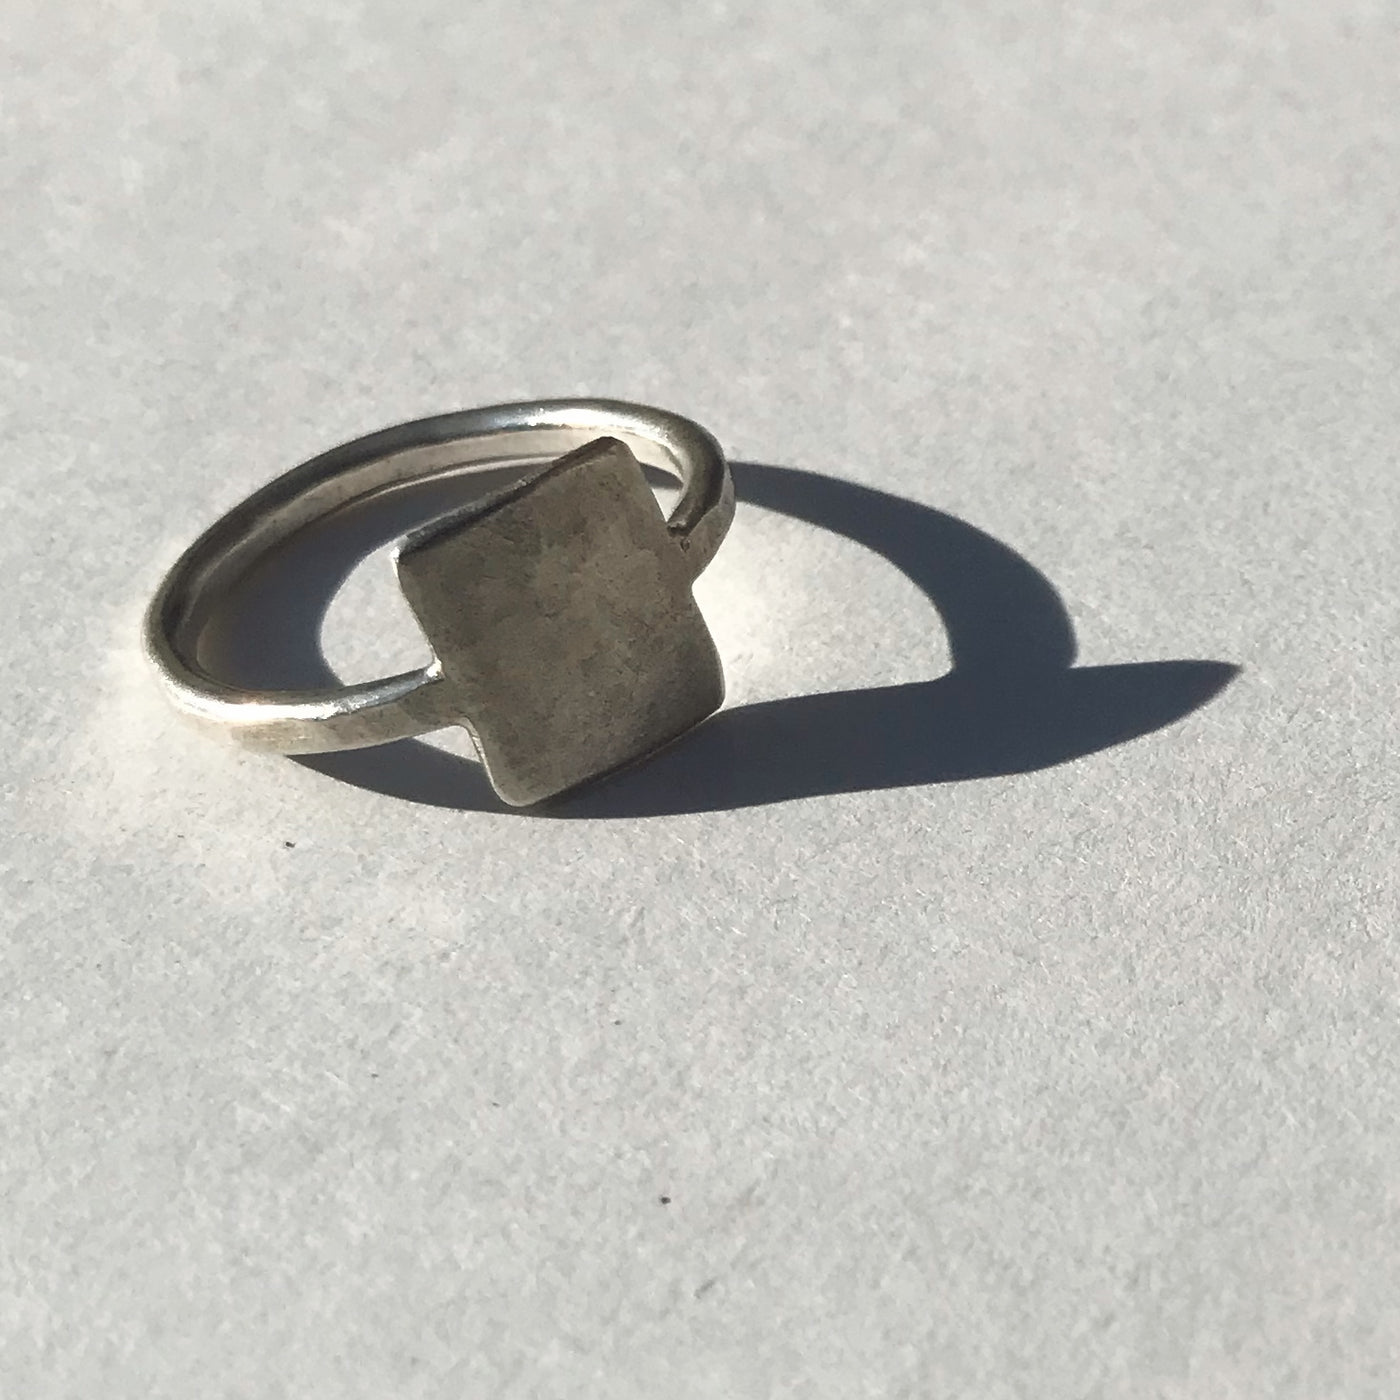 LITTLE SQUARE RING - 925 SILVER